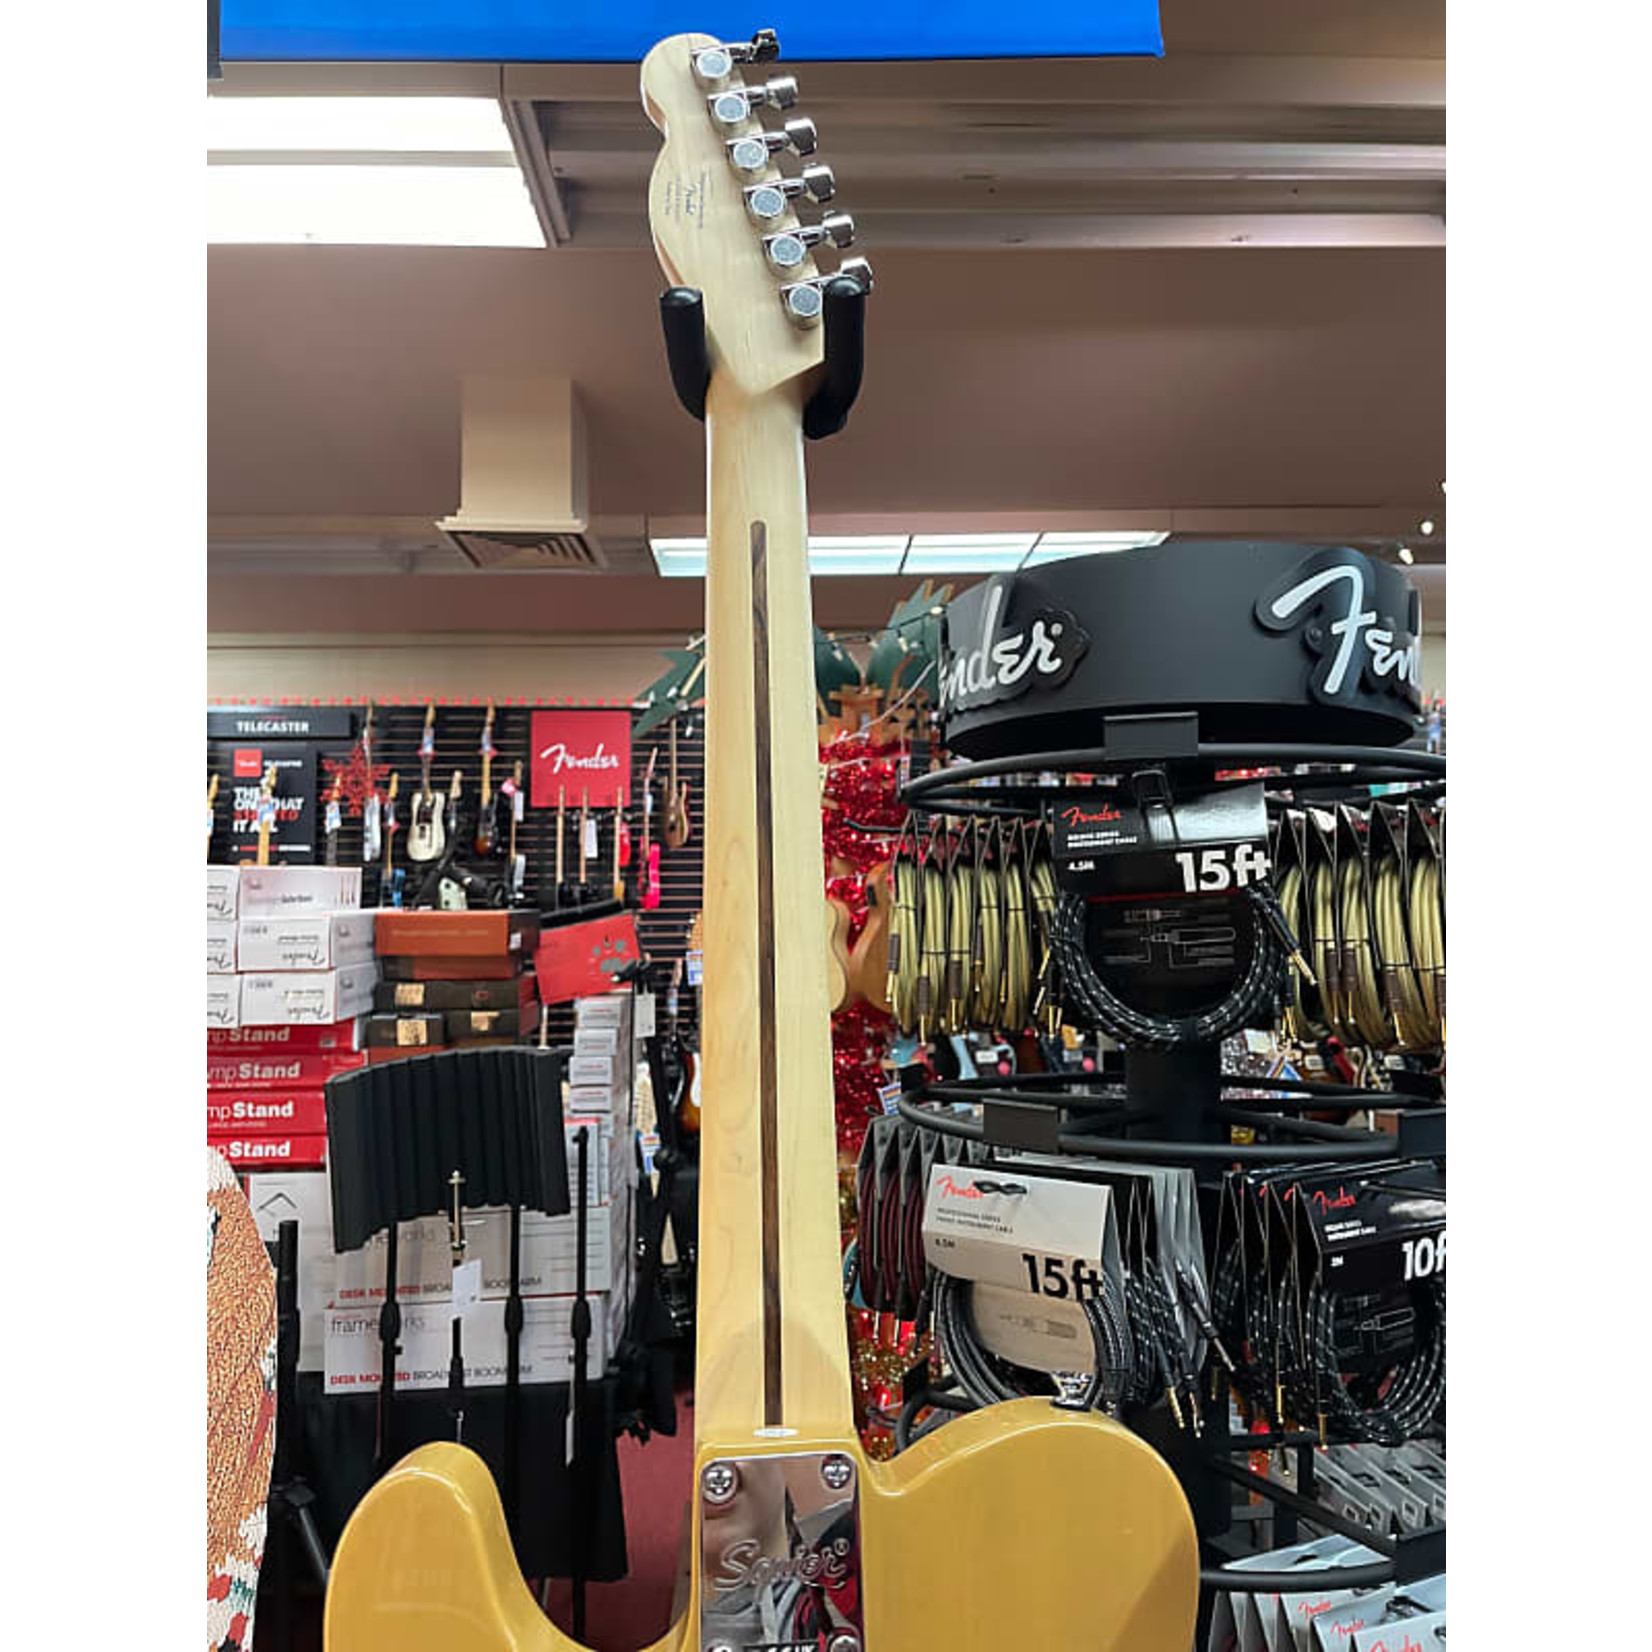 Squier AFFINITY SERIES™ TELECASTER®